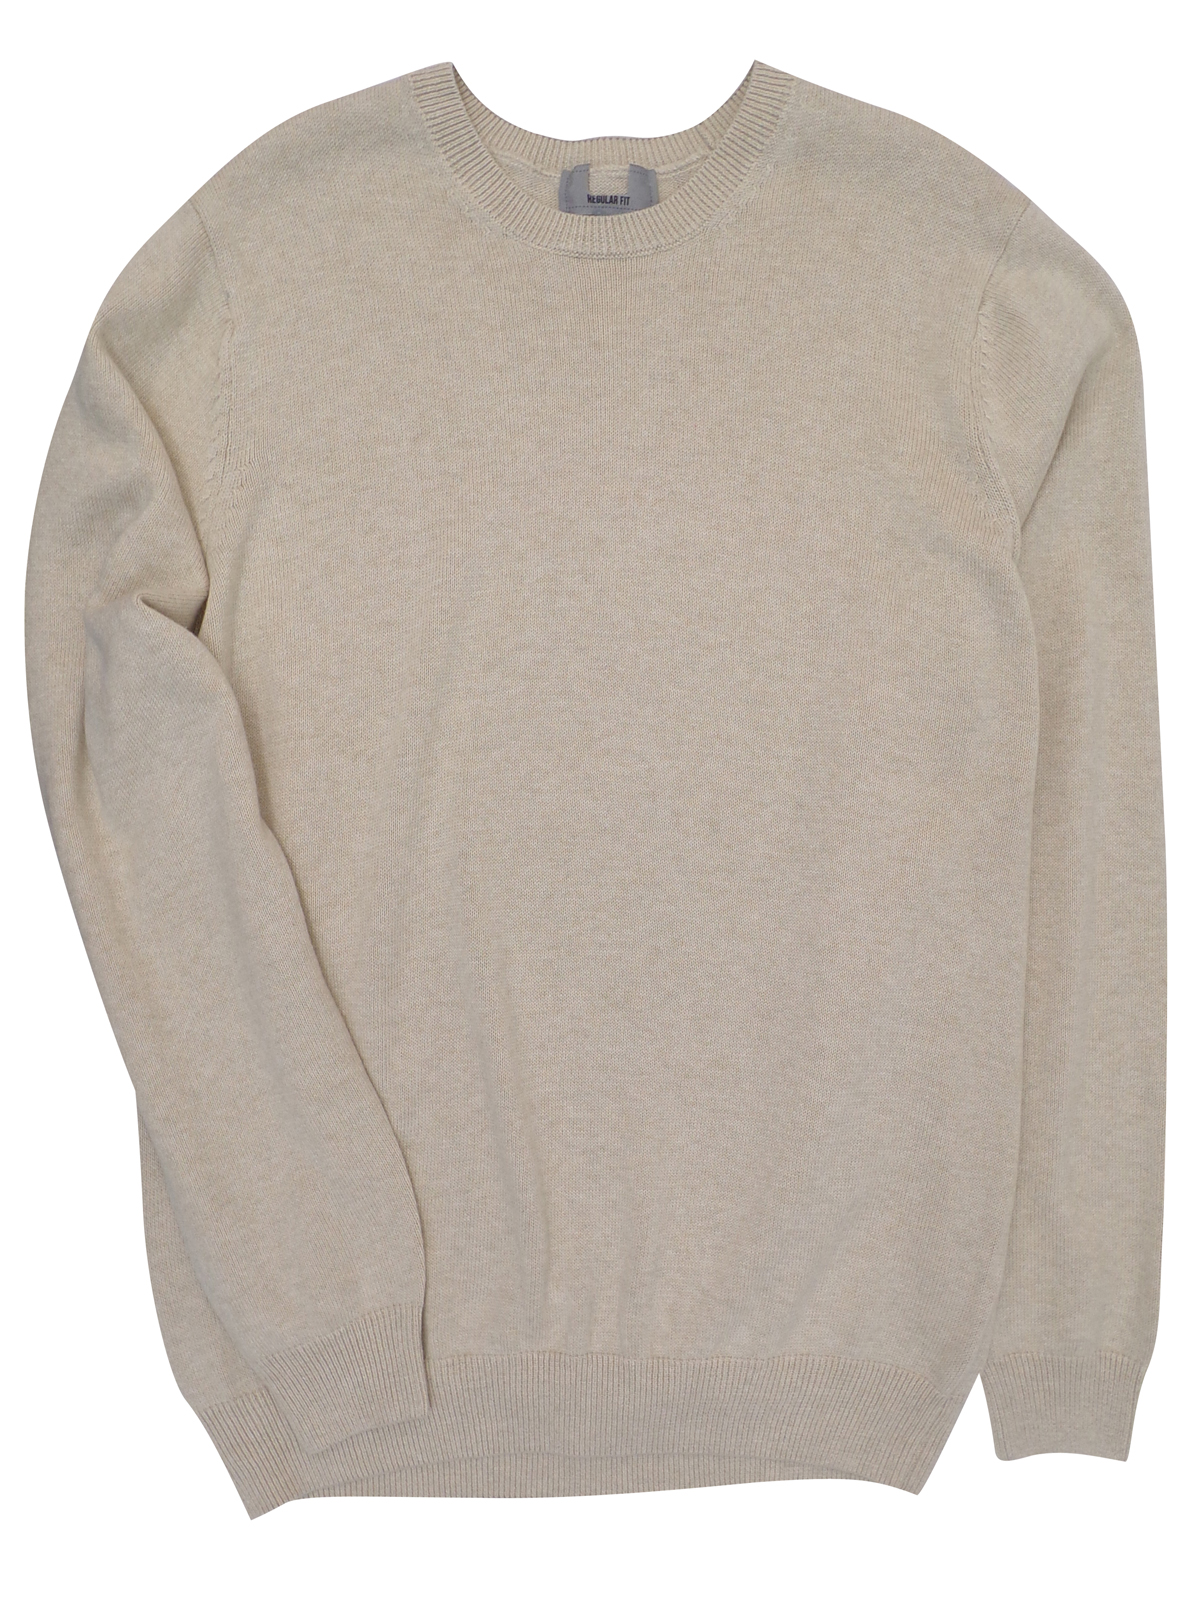 Marks and Spencer - - M&5 SAND Pure Cotton Long Sleeve Jumper - Size ...